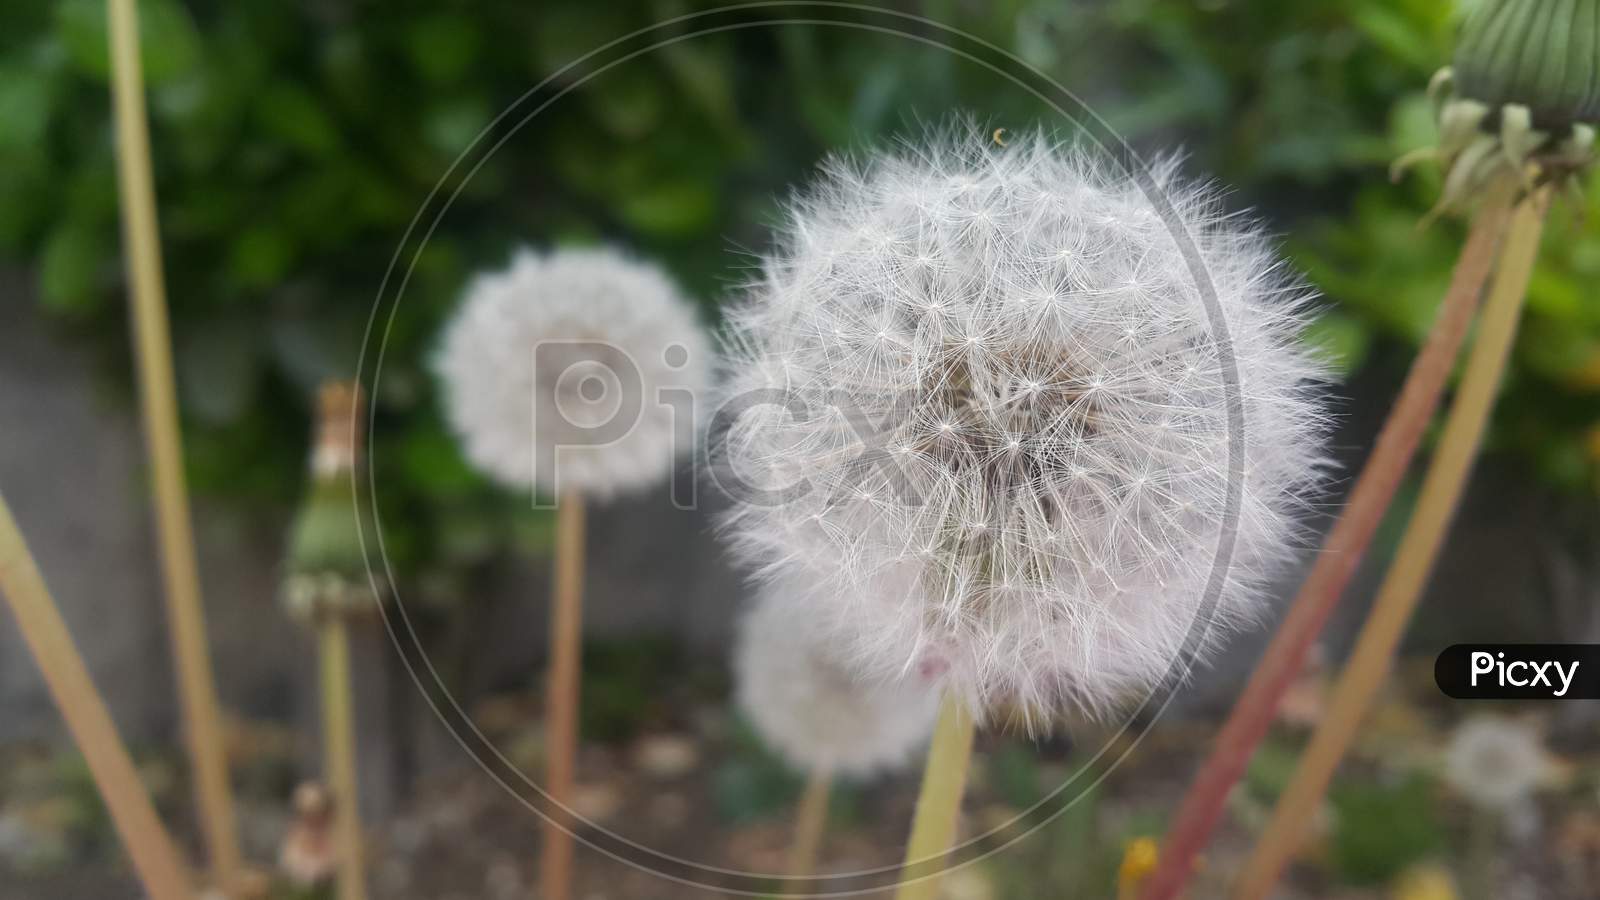 Delicate Fluffy Flower Selectively Focused On A Blurred Green Leaves Background